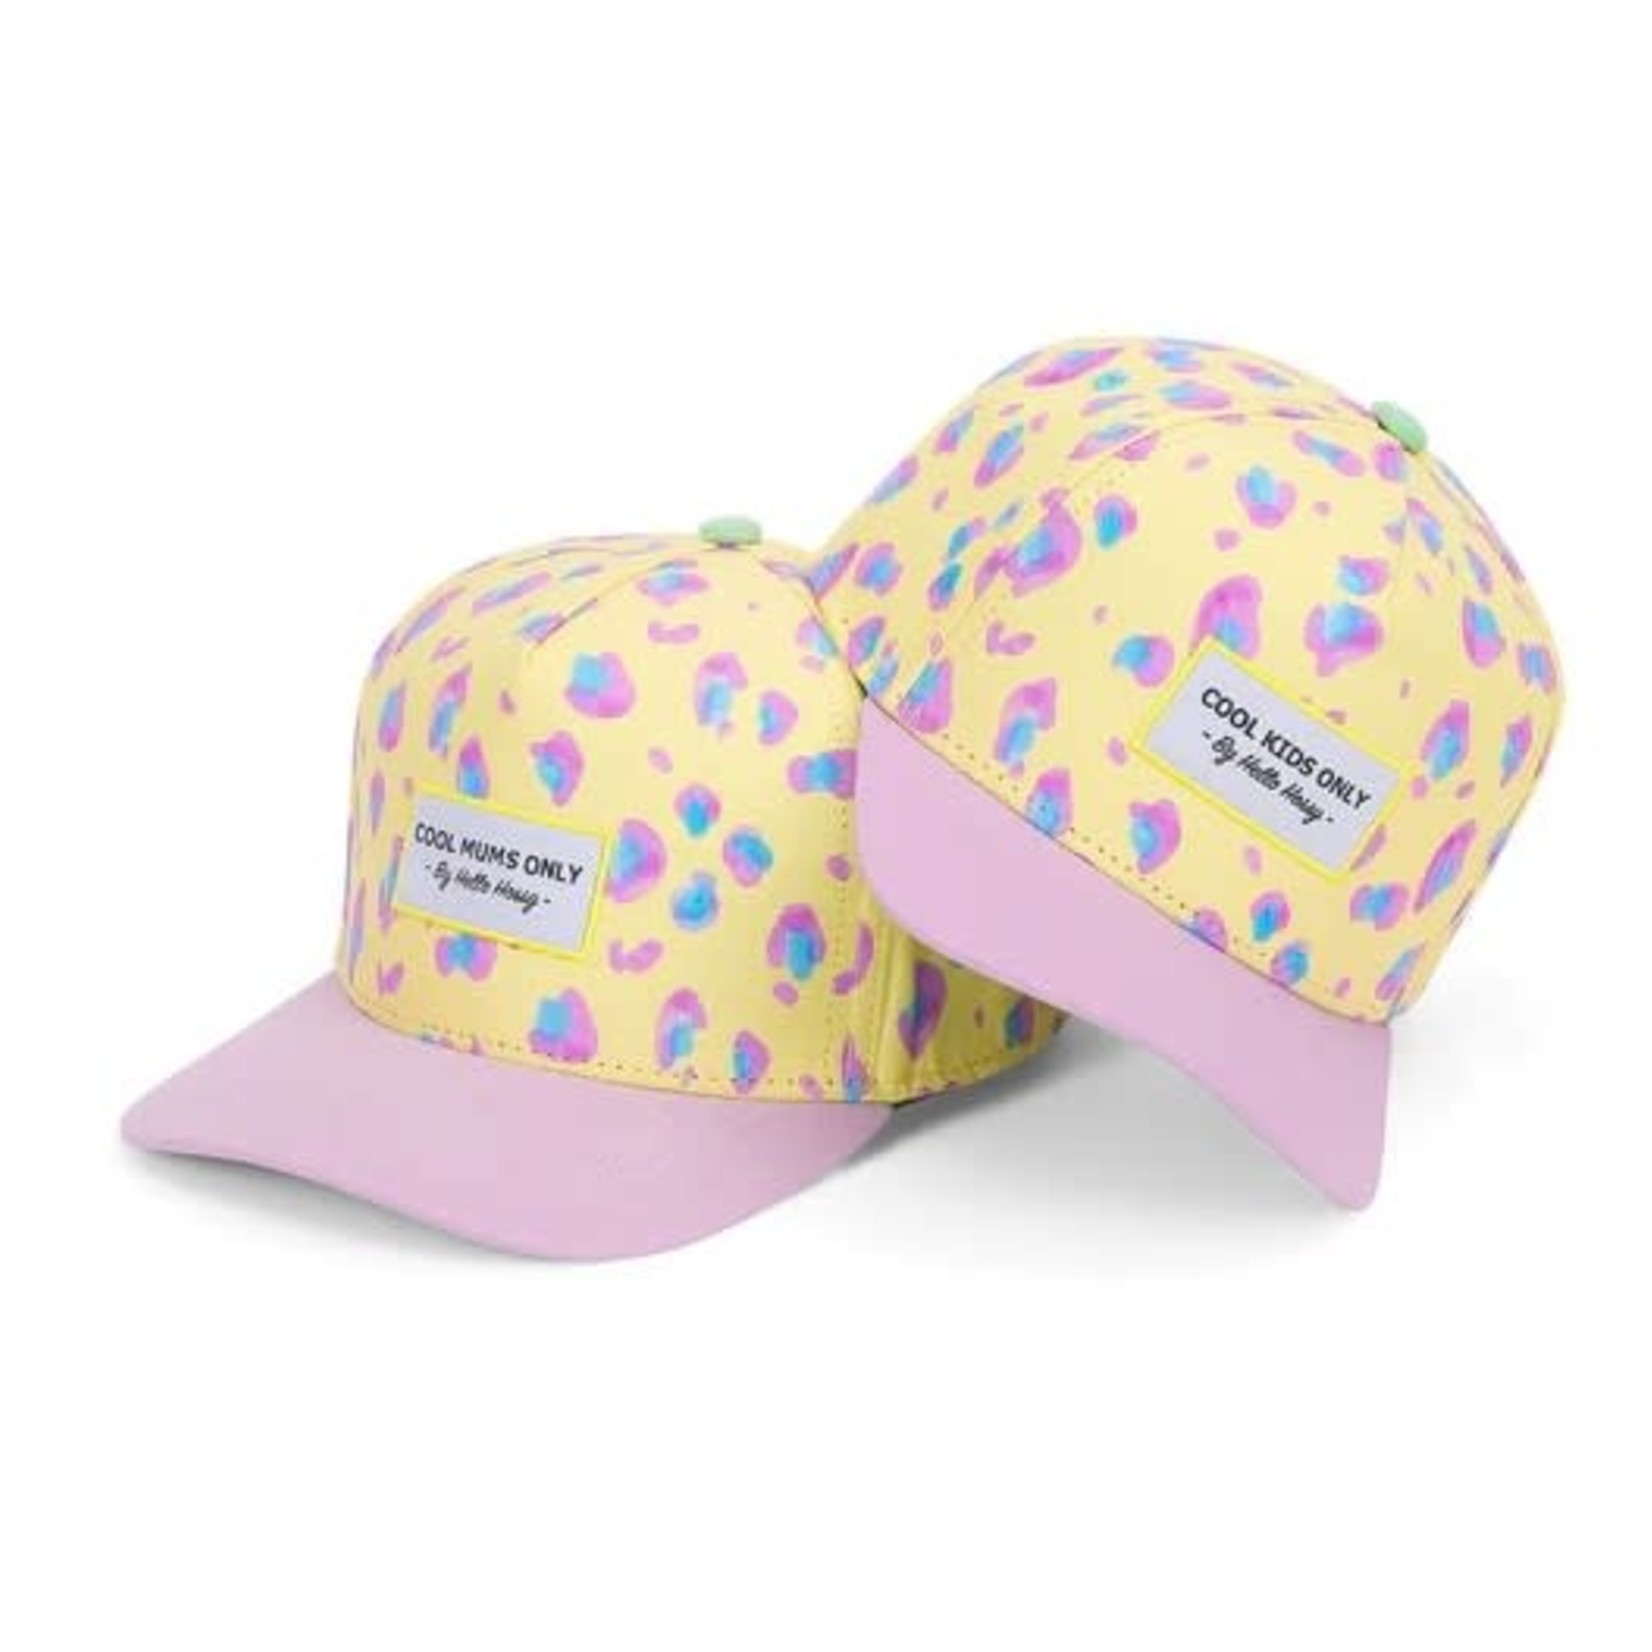 HELLO HOSSY HELLO HOSSY - Casquette - Leopard - Adultes